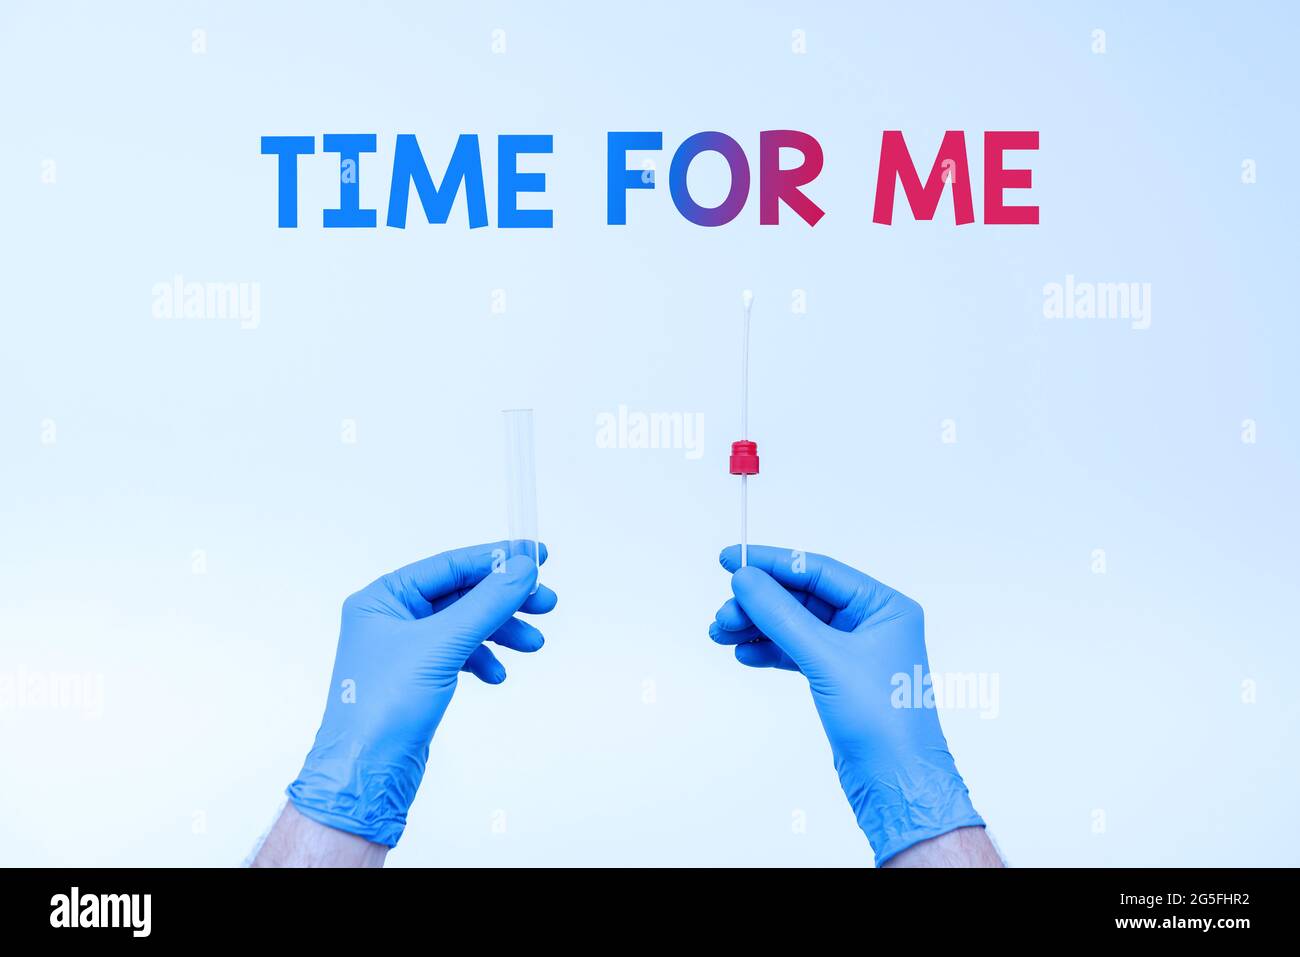 Sign displaying Time For Me. Business concept practice of taking action preserve or improve ones own health Research Scientist Presenting New Medicine Stock Photo